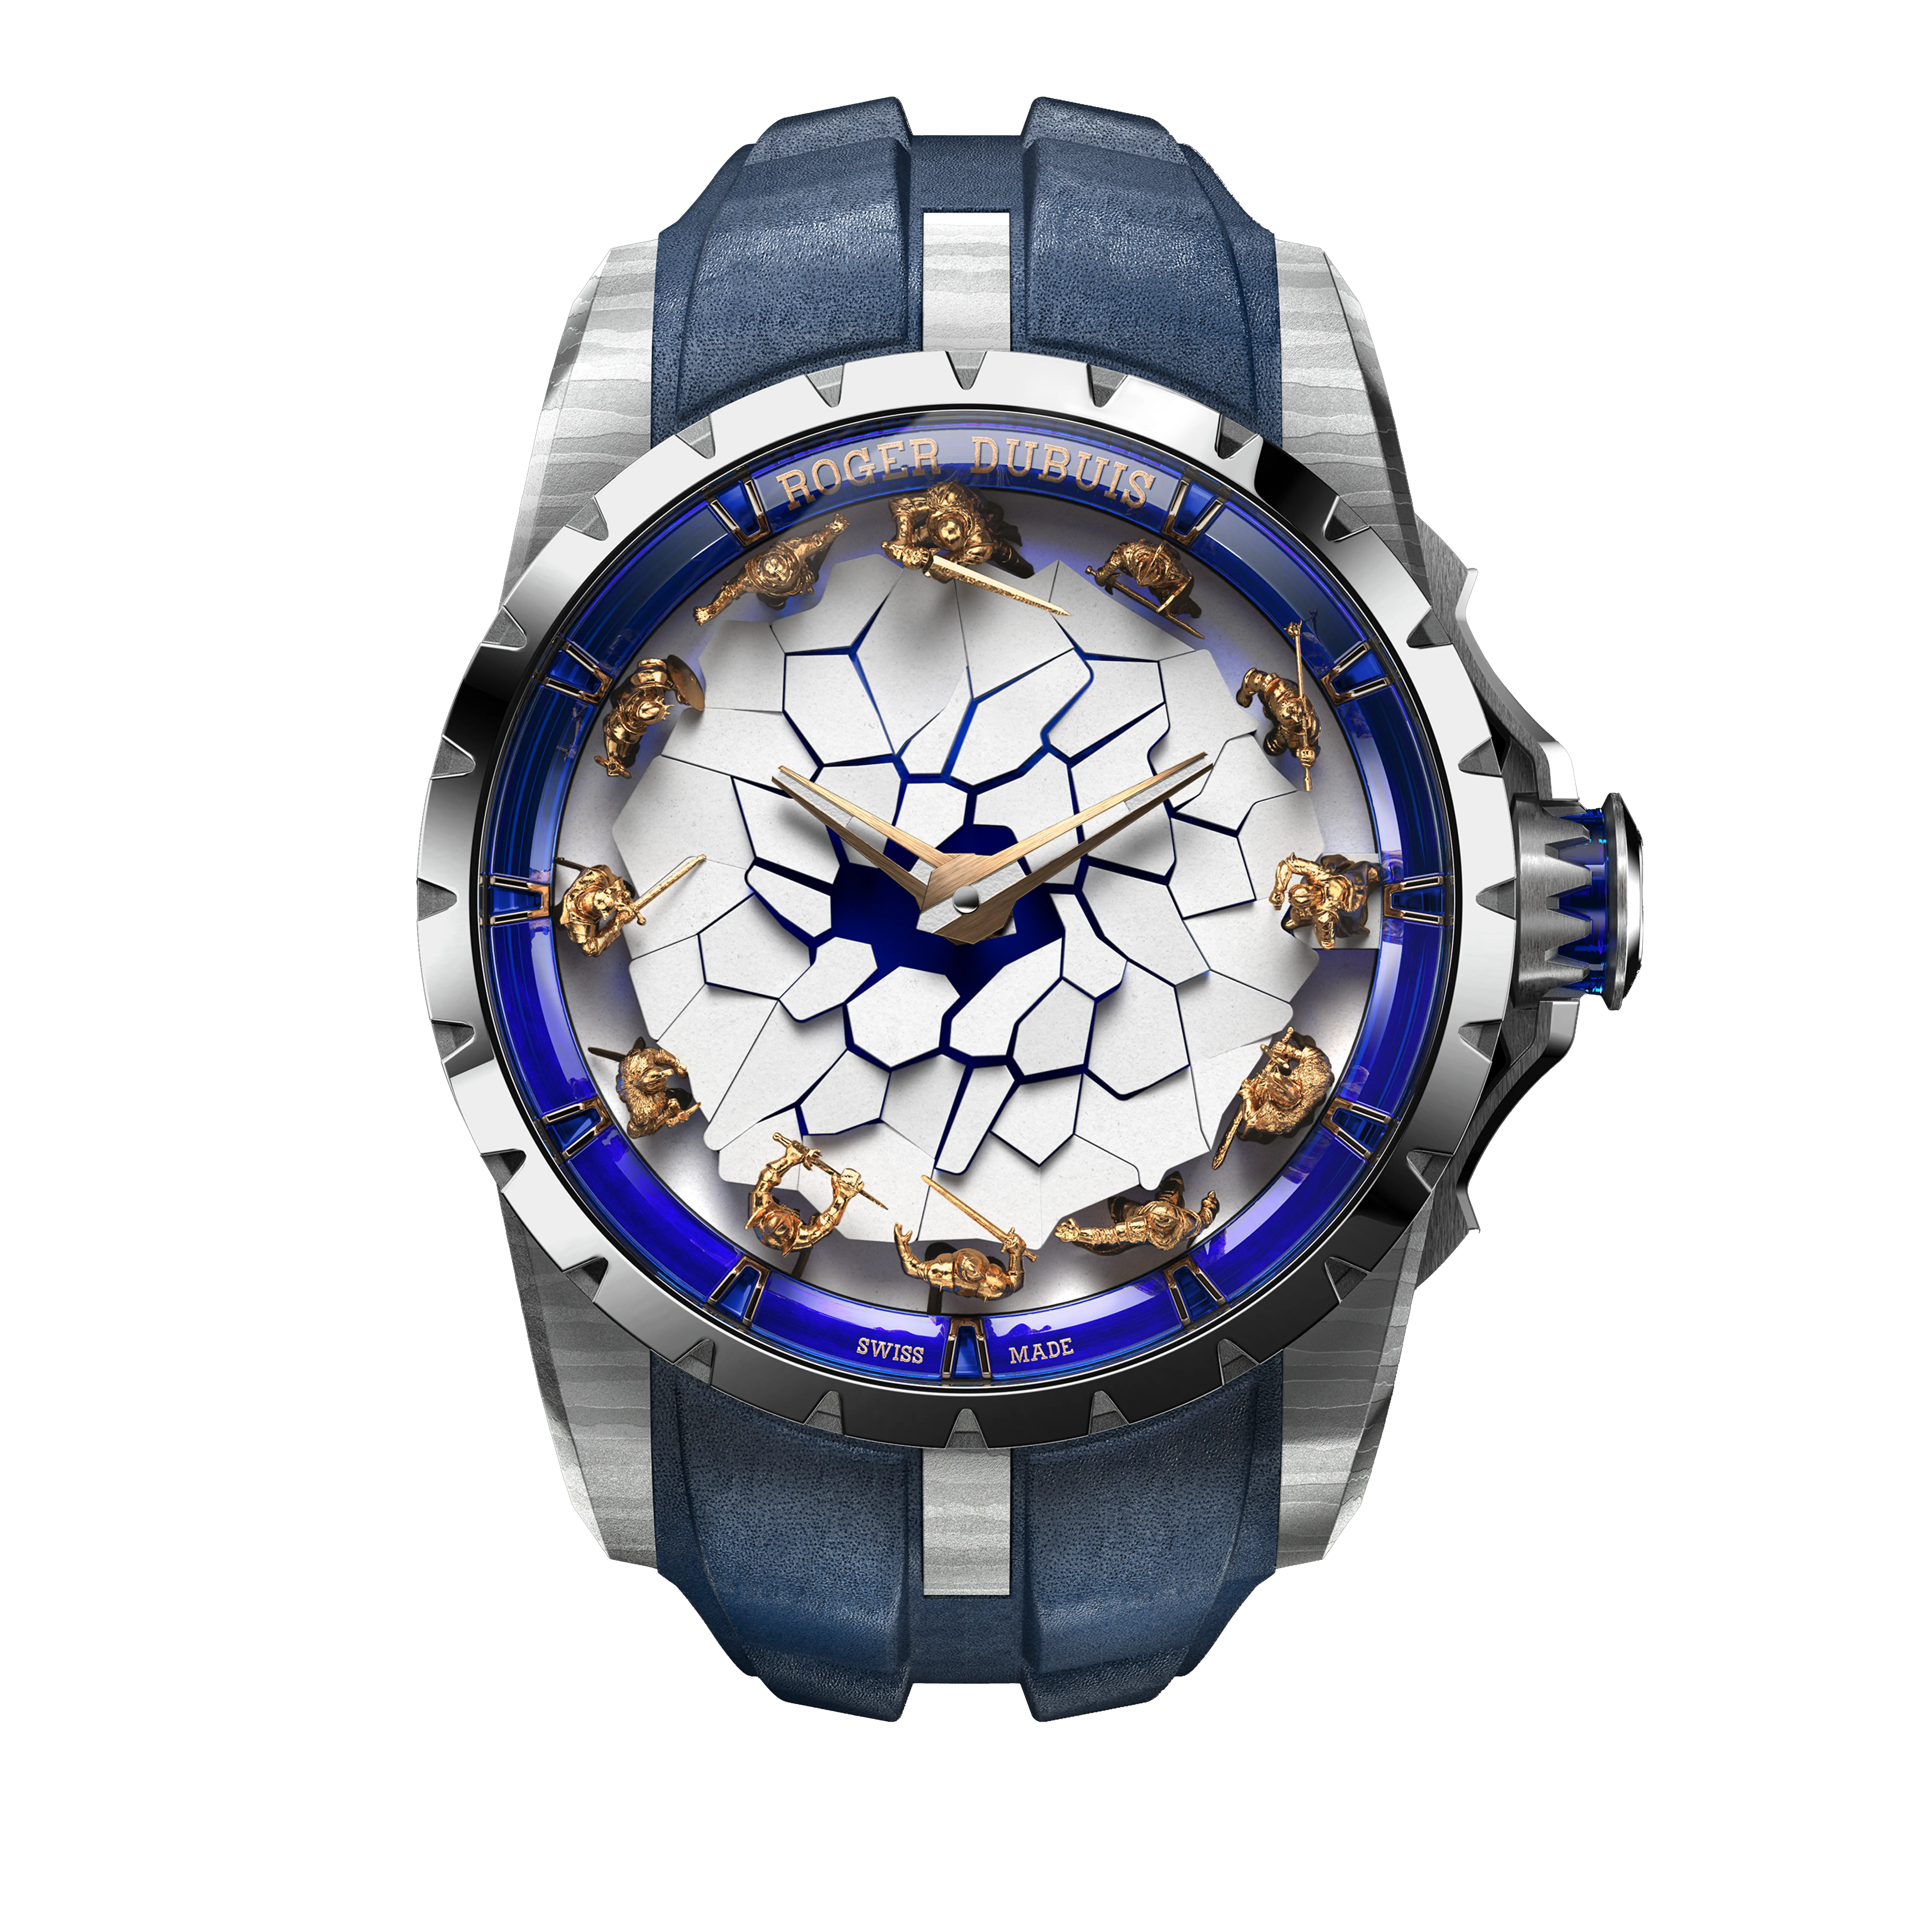 Roger Dubuis KNIGHTS OF THE ROUND TABLE DAMASCUS TITANIUM DBEX1058 Titanium, Automatic, self-winding, 45mm